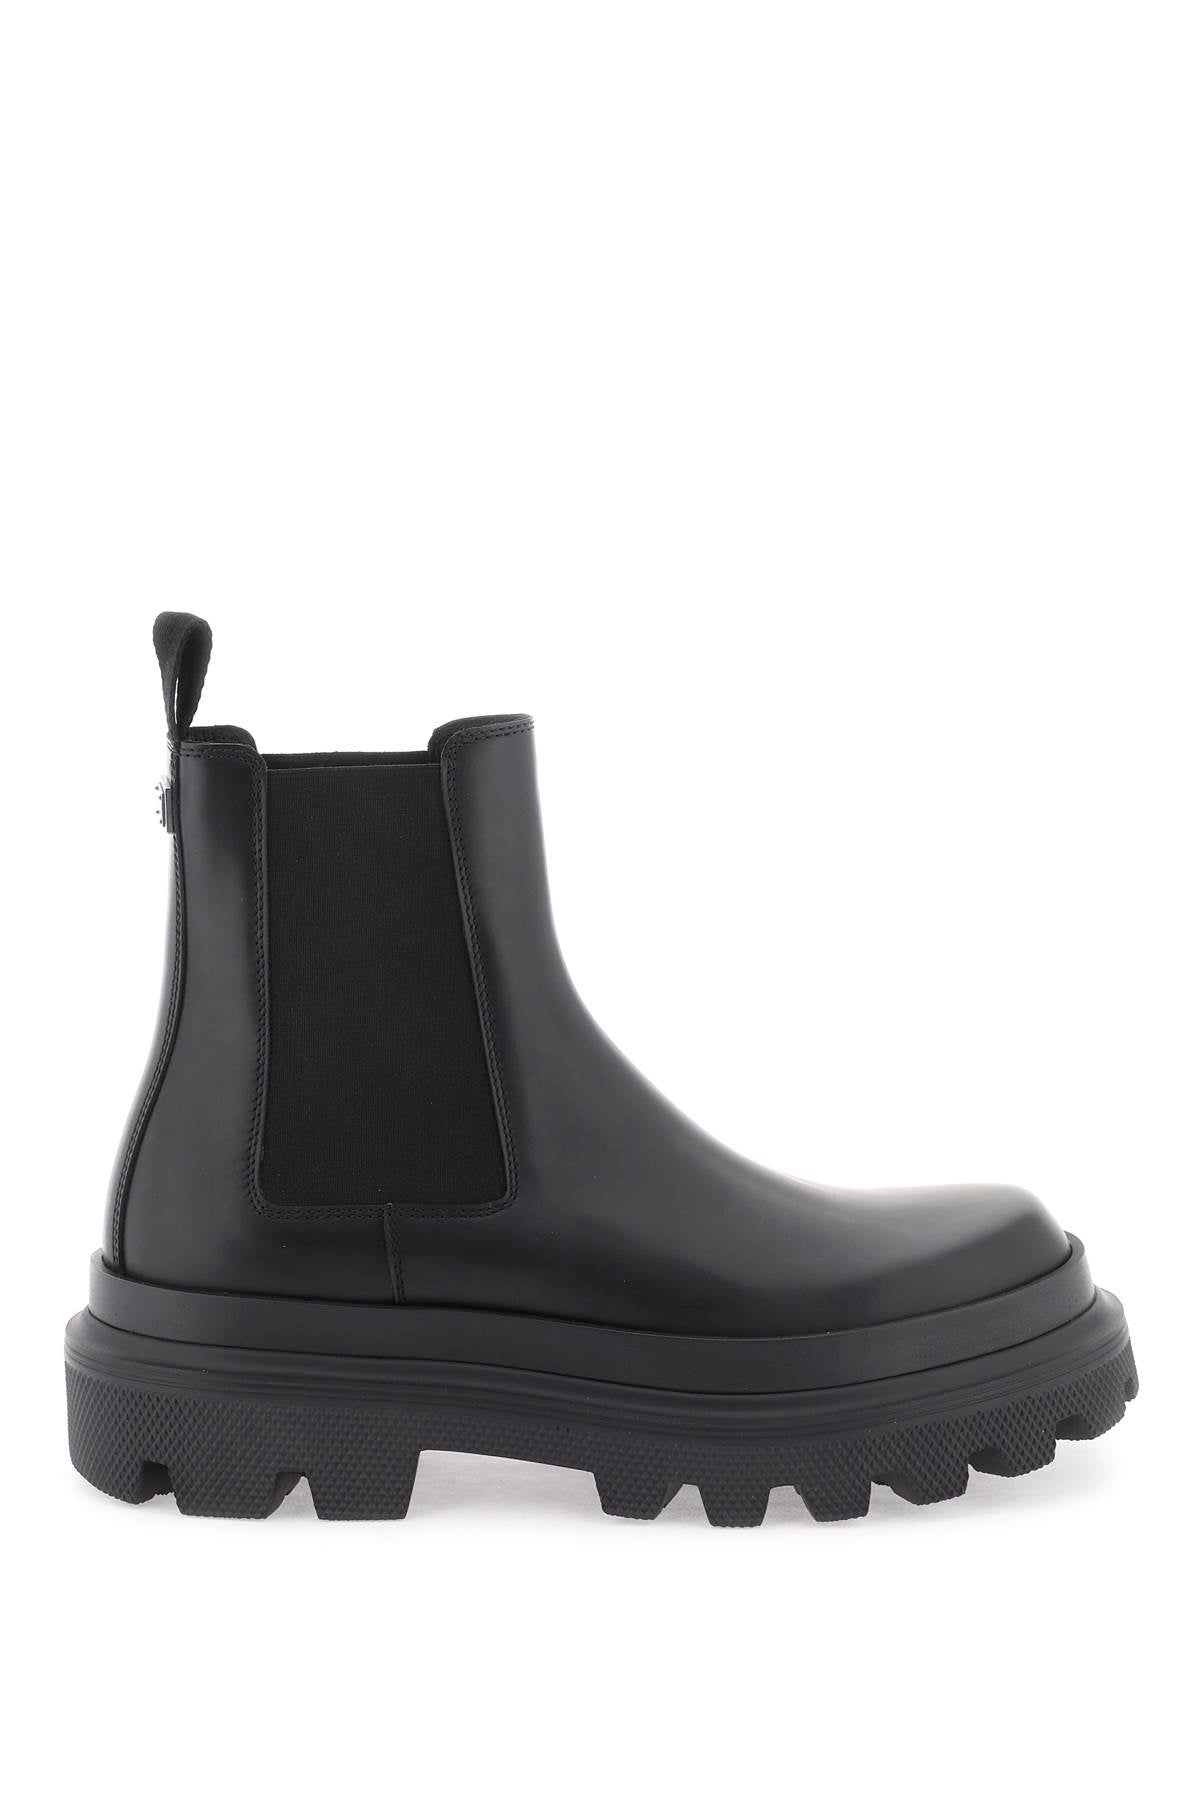 Dolce & gabbana chelsea boots in brushed leather-0